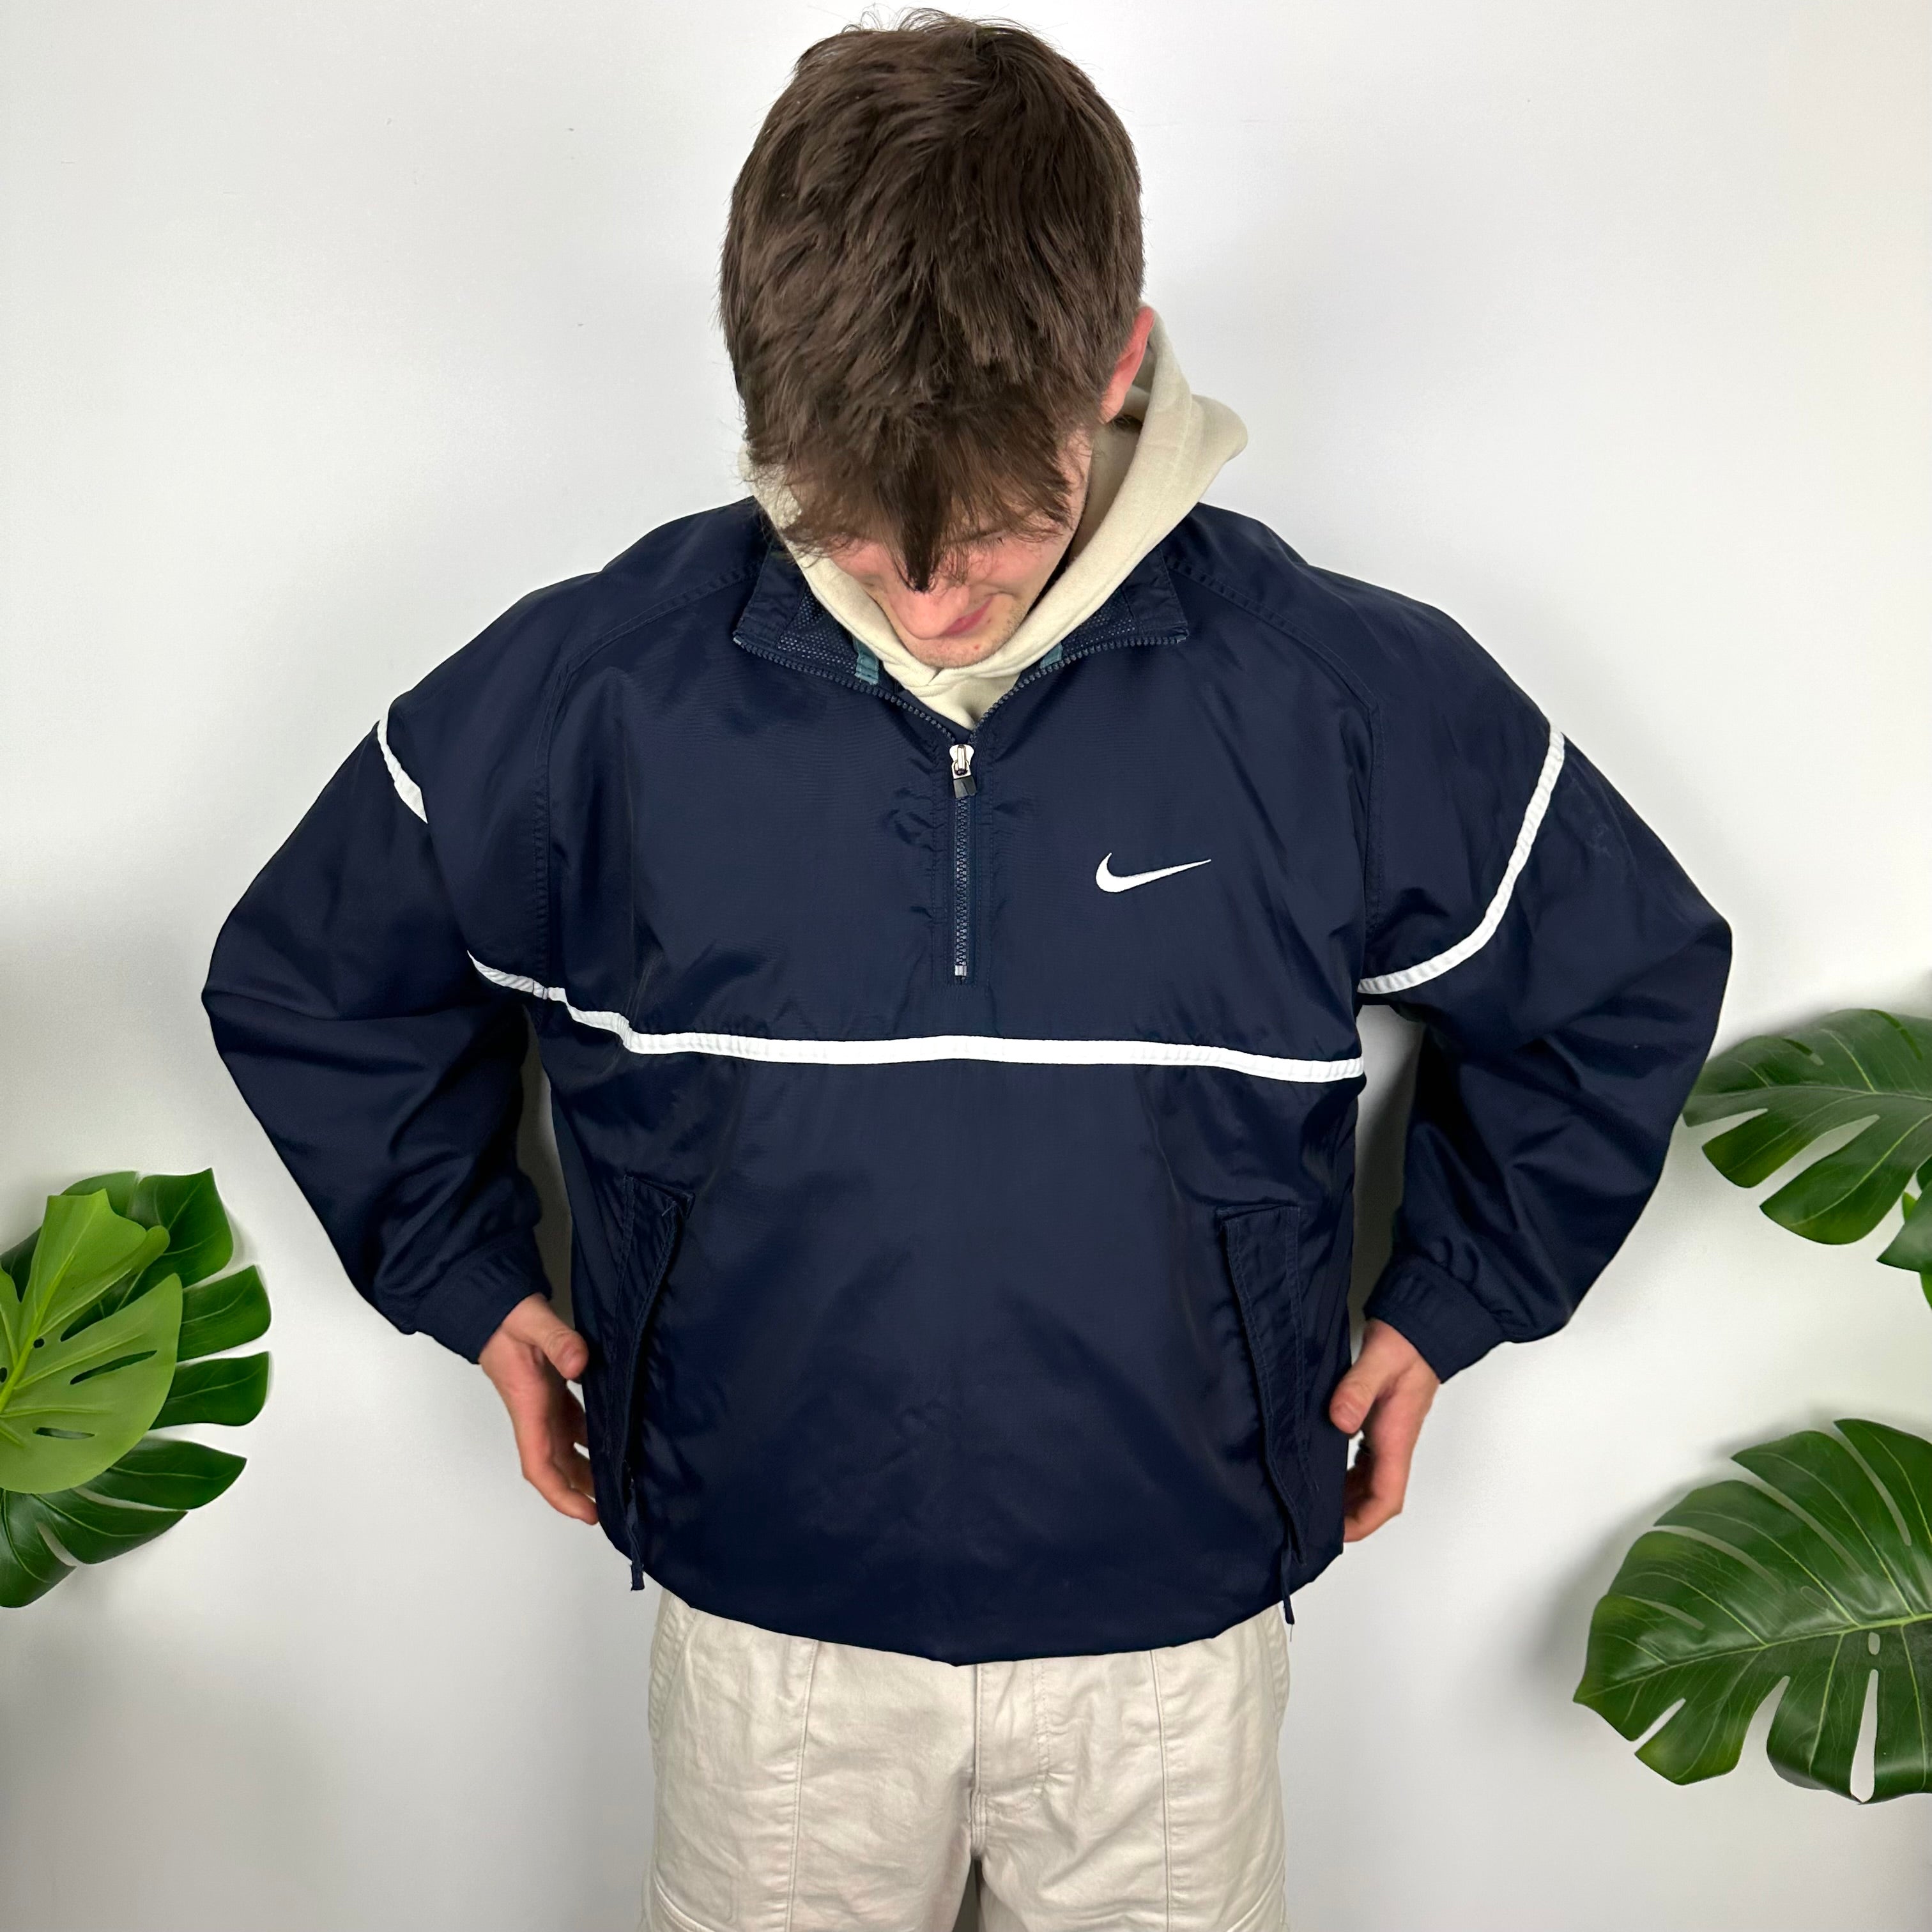 Nike Navy Embroidered Spell Out Quarter Zip Windbreaker Jacket (L)